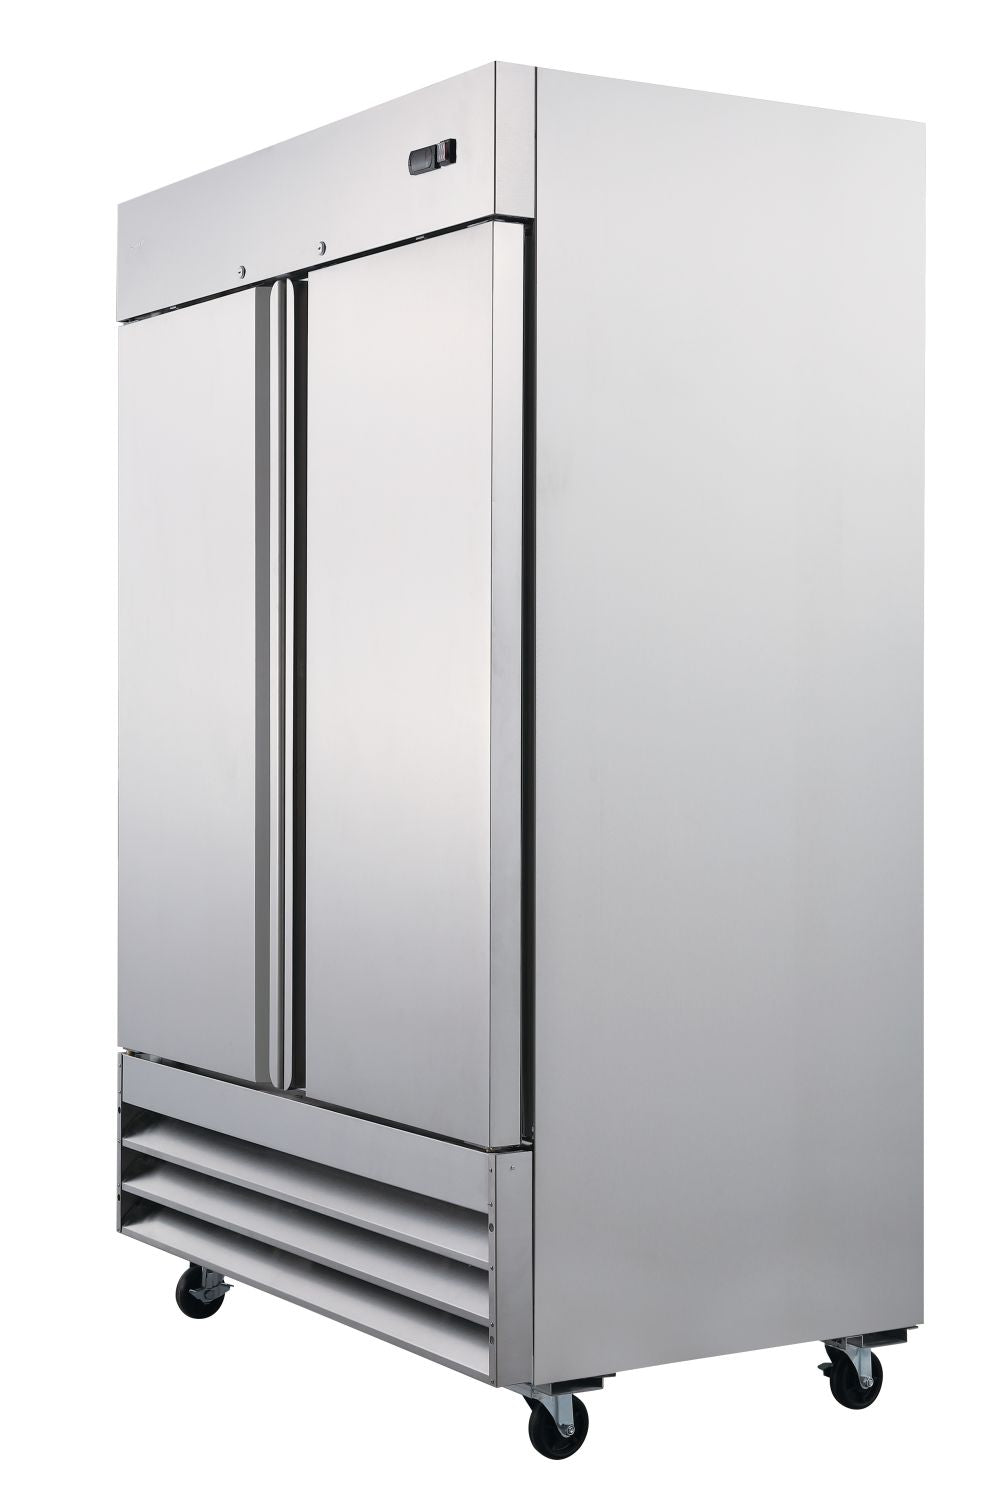  Commercial Cool Upright Freezer, Stand Up Freezer 5 Cu Ft with  Reversible Door, Black : Appliances